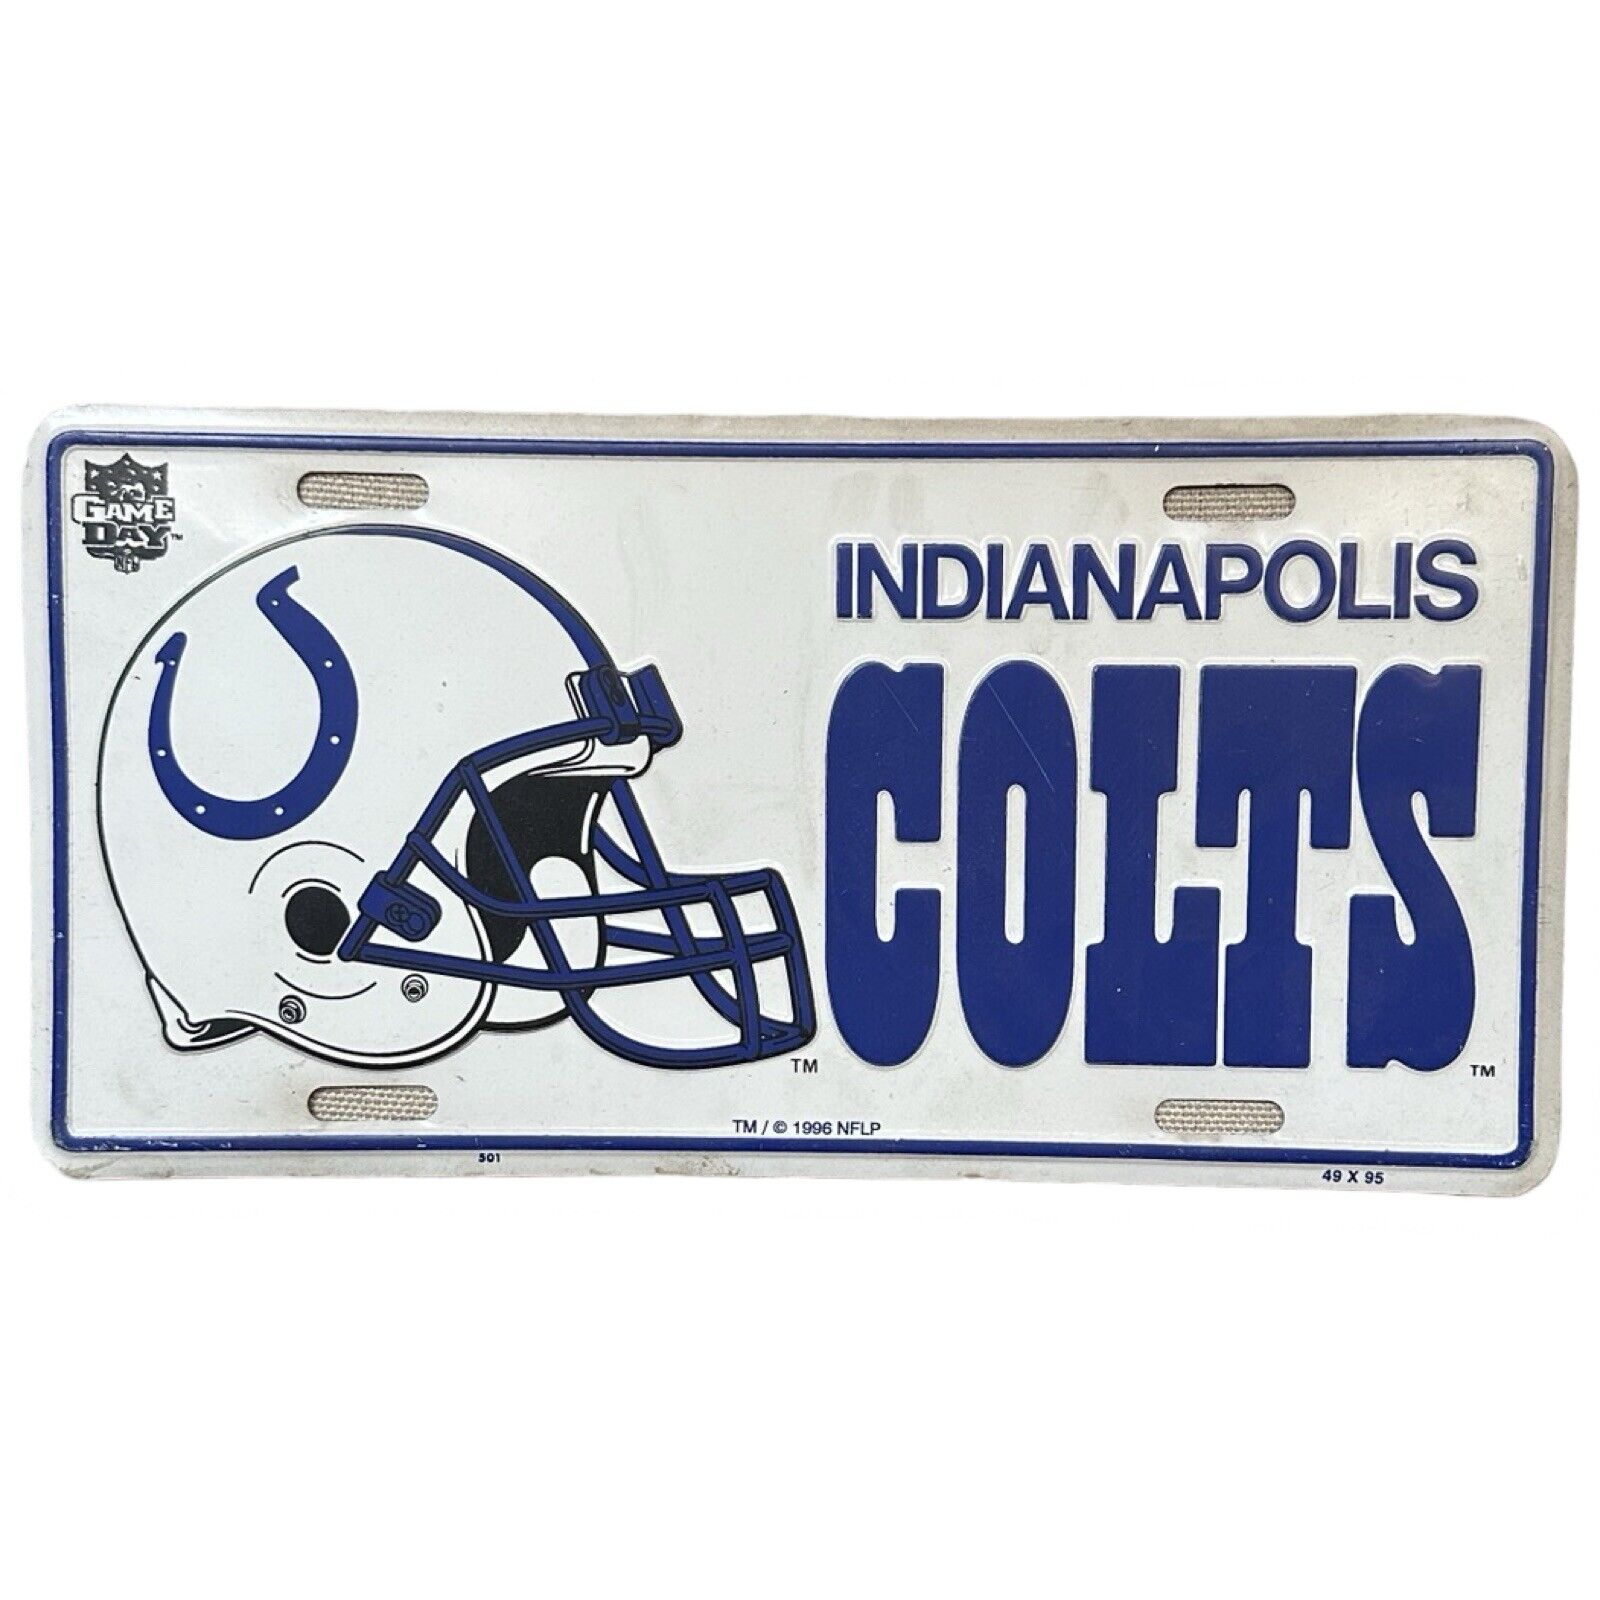 Vintage 1990s Indianapolis Colts Metal License Plate